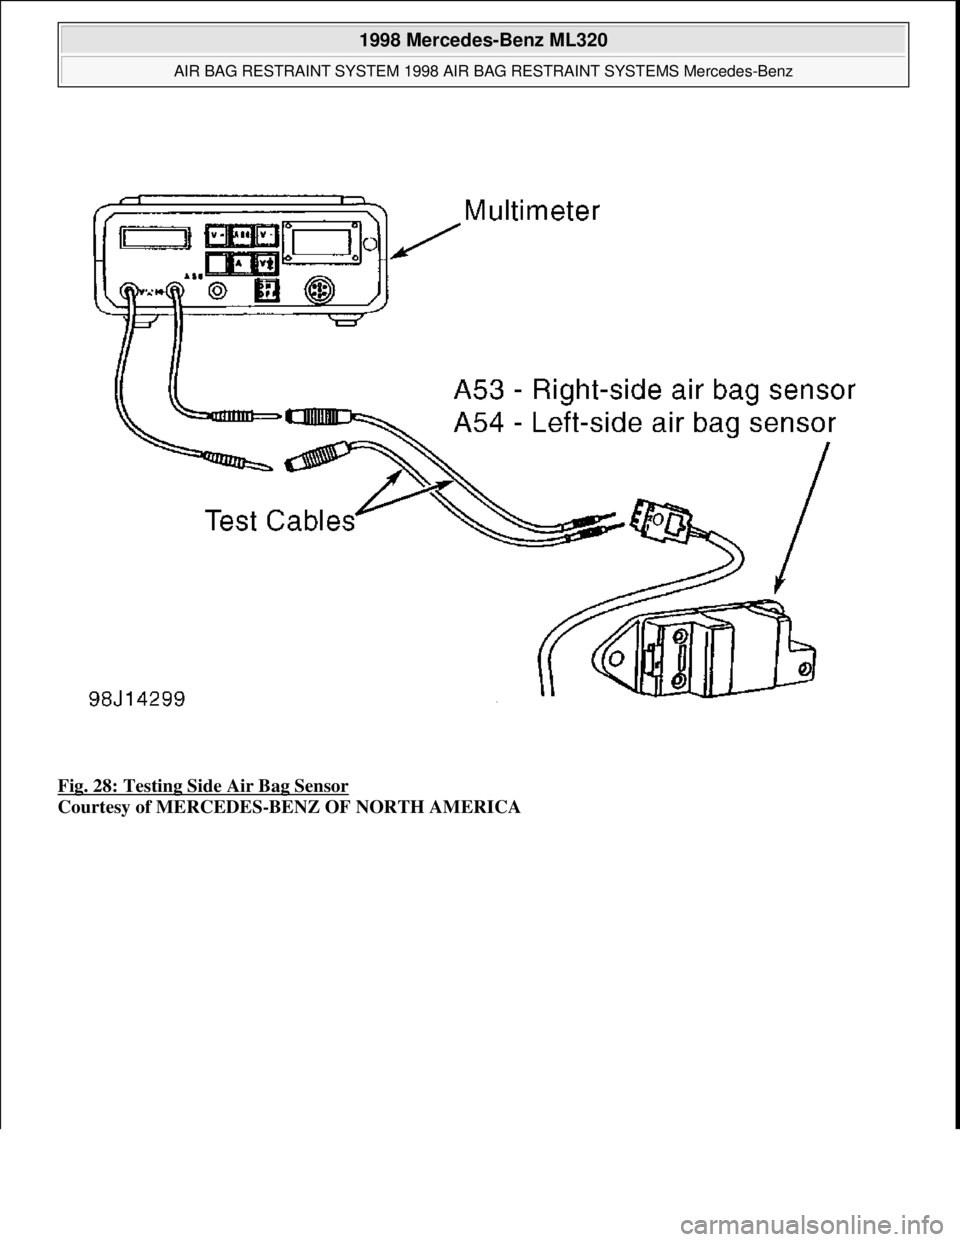 MERCEDES-BENZ ML350 1997  Complete Owners Guide Fig. 28: Testing Side Air Bag Sensor 
Courtesy of MERCEDES-BENZ OF NORTH AMERICA
 
1998 Mercedes-Benz ML320 
AIR BAG RESTRAINT SYSTEM 1998 AIR BAG RESTRAINT SYSTEMS Mercedes-Benz  
me  
Saturday, Octo